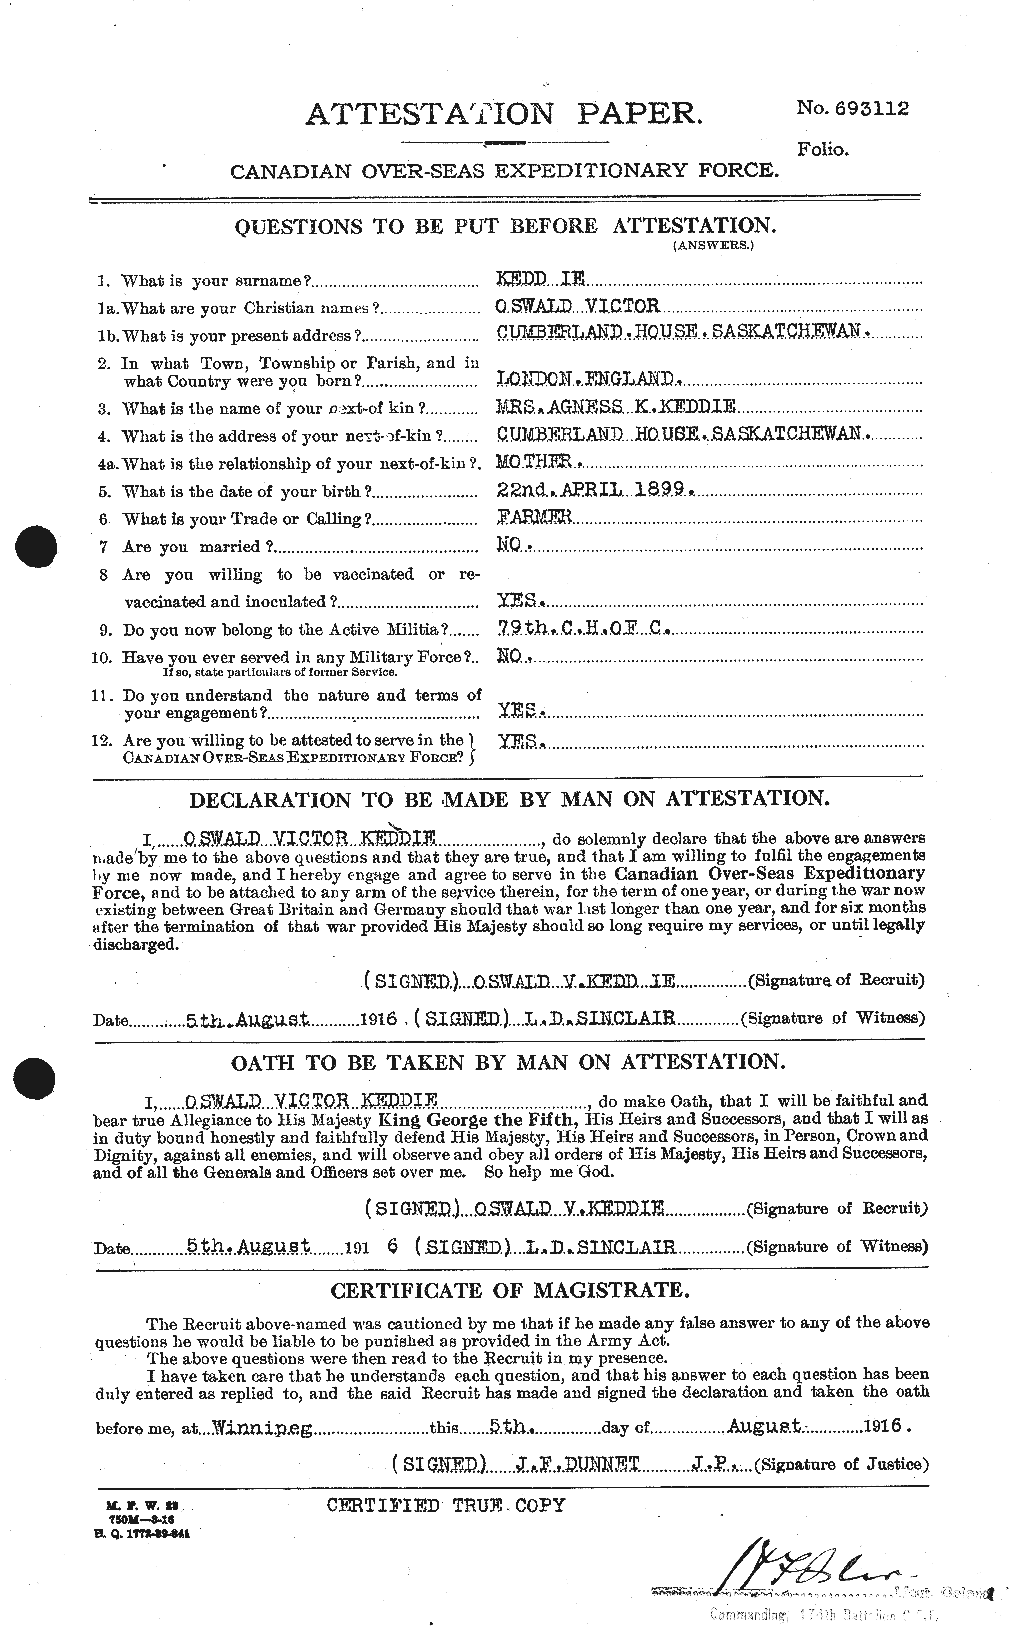 Personnel Records of the First World War - CEF 427572a